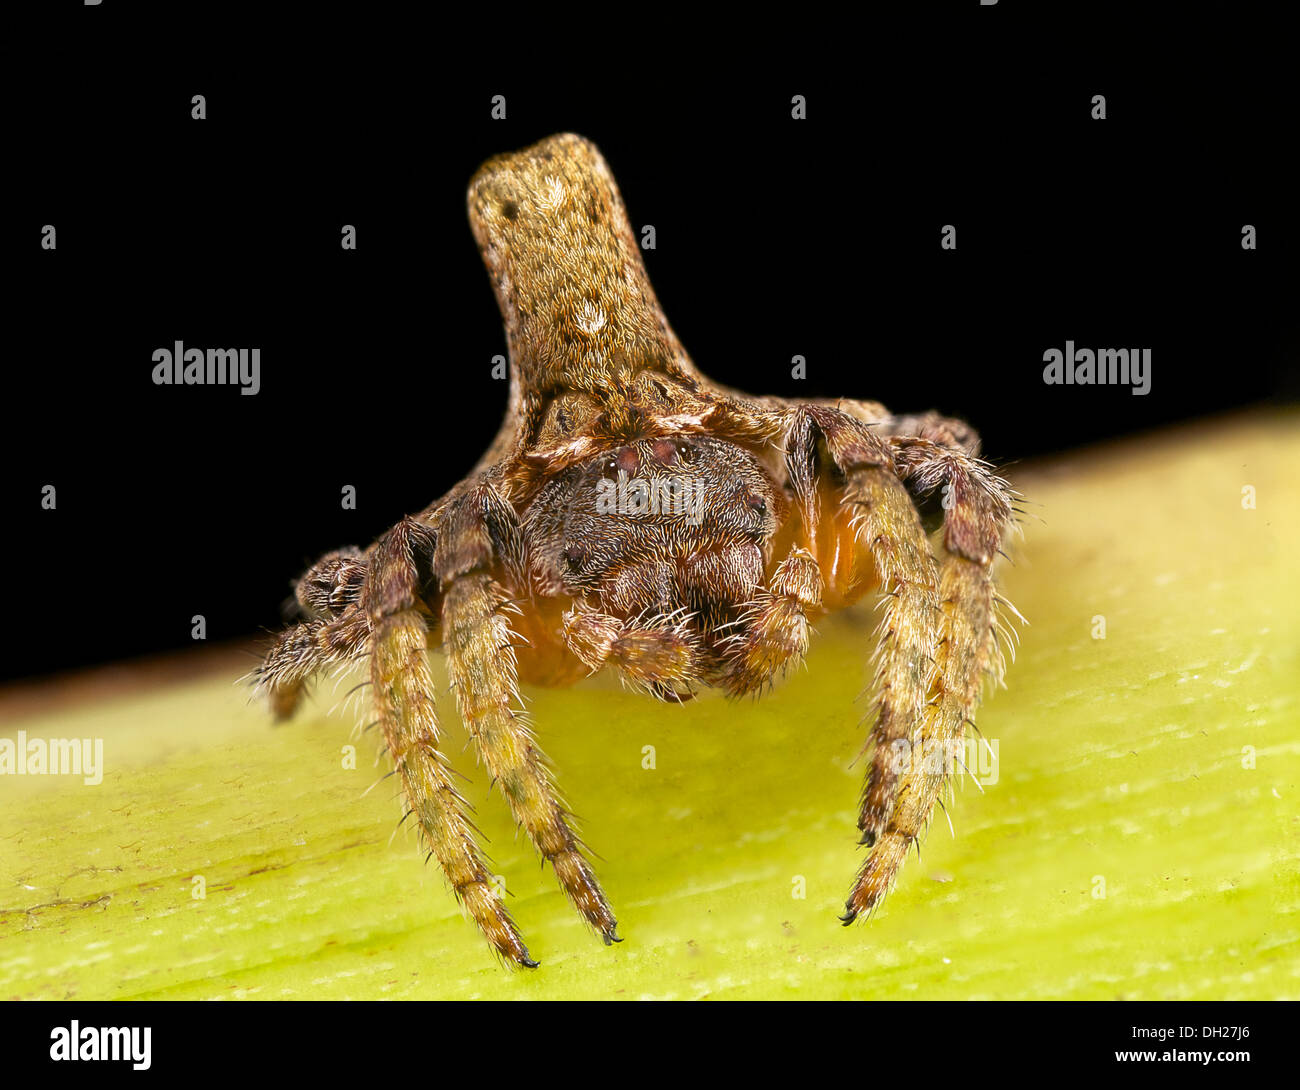 a small spider on a leaf (Dolophones turrigera) Stock Photo